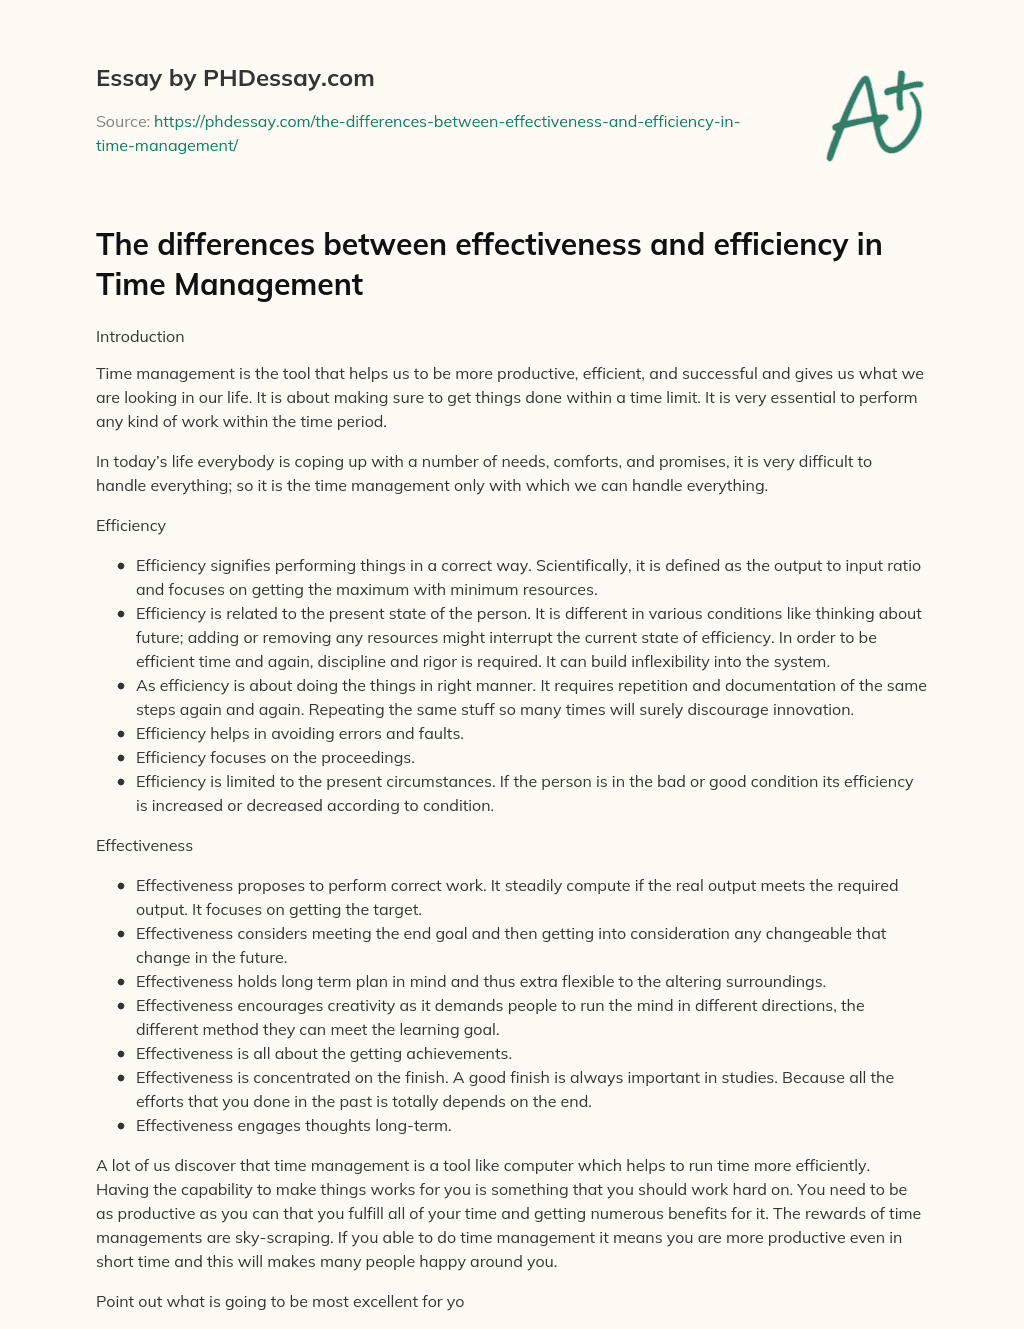 The differences between effectiveness and efficiency in Time Management essay